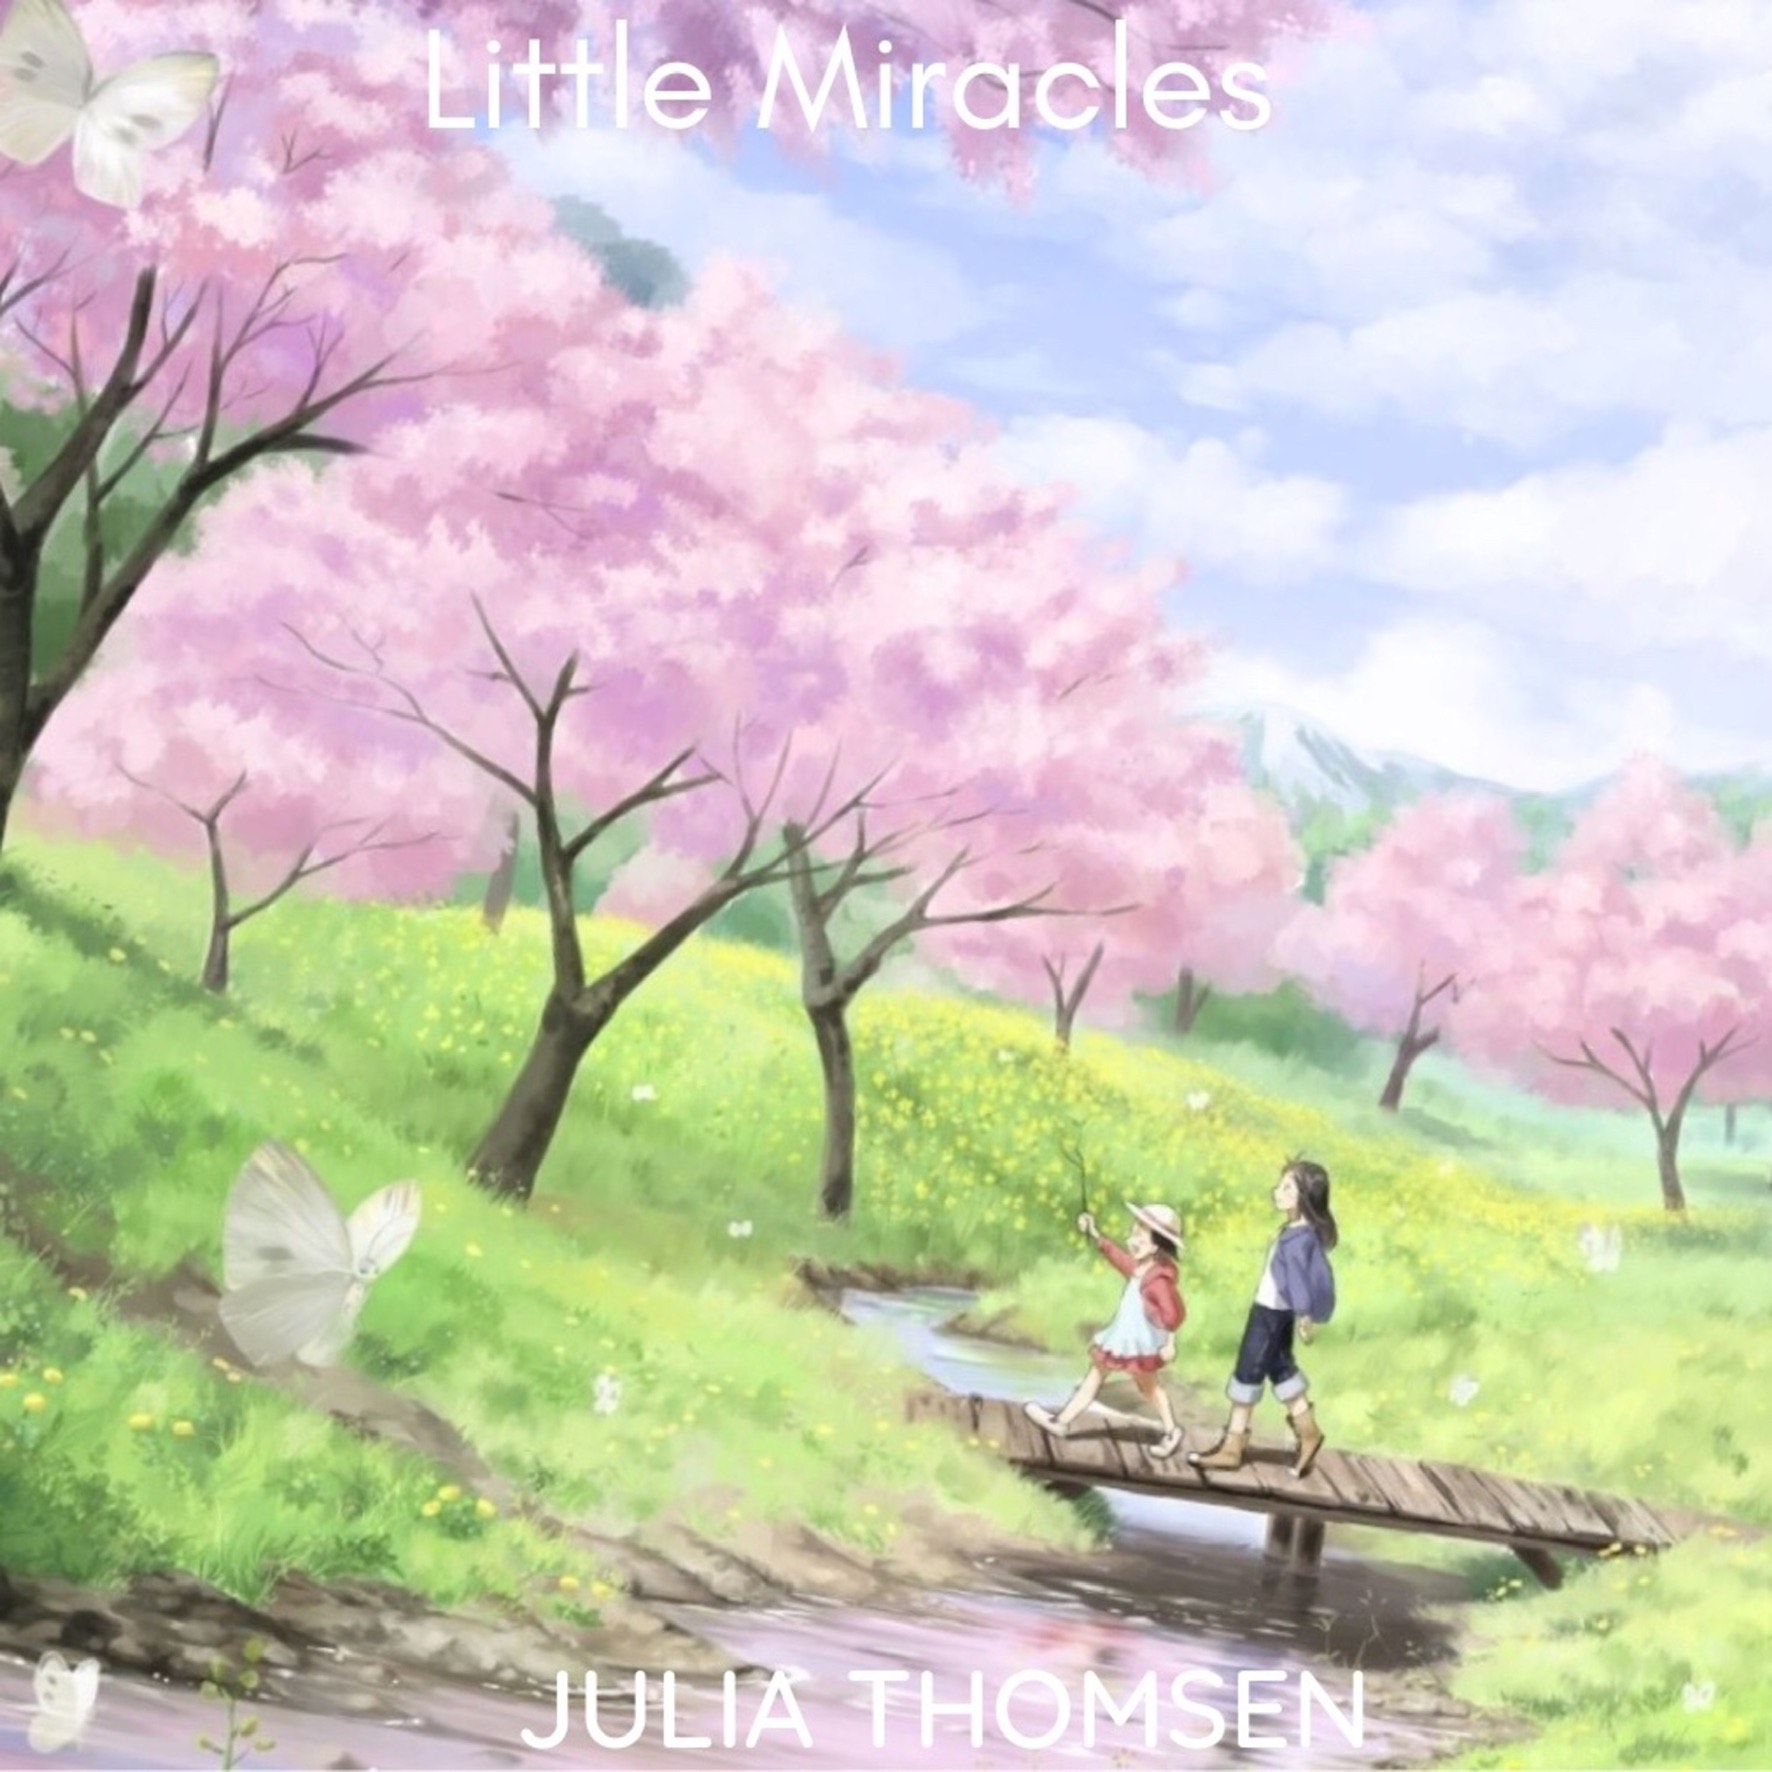 Renowned Composer Julia Thomsen Unveils New Composition “Little Miracles”